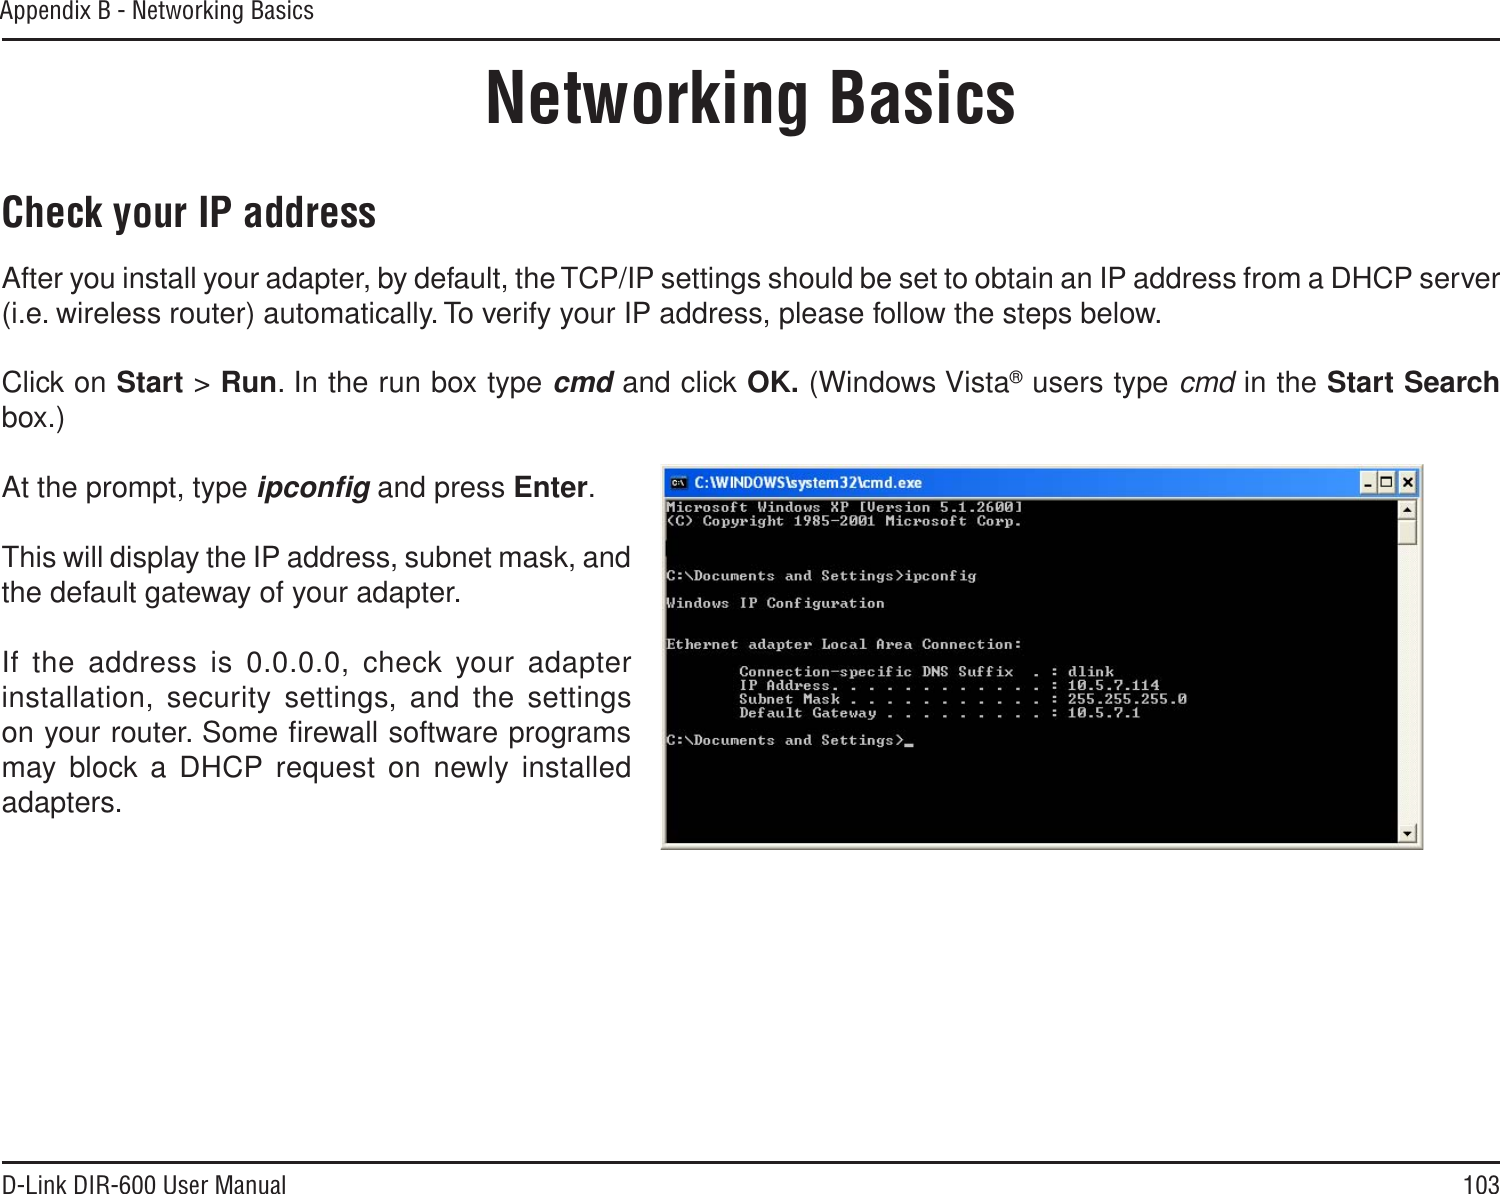 103D-Link DIR-600 User ManualAppendix B - Networking BasicsNetworking BasicsCheck your IP addressAfter you install your adapter, by default, the TCP/IP settings should be set to obtain an IP address from a DHCP server (i.e. wireless router) automatically. To verify your IP address, please follow the steps below.Click on Start &gt; Run. In the run box type cmd and click OK. (Windows Vista® users type cmd in the Start Searchbox.)At the prompt, type ipconﬁg and press Enter.This will display the IP address, subnet mask, and the default gateway of your adapter.If the address is 0.0.0.0, check your adapter installation, security settings, and the settings on your router. Some ﬁrewall software programs may block a DHCP request on newly installed adapters. 